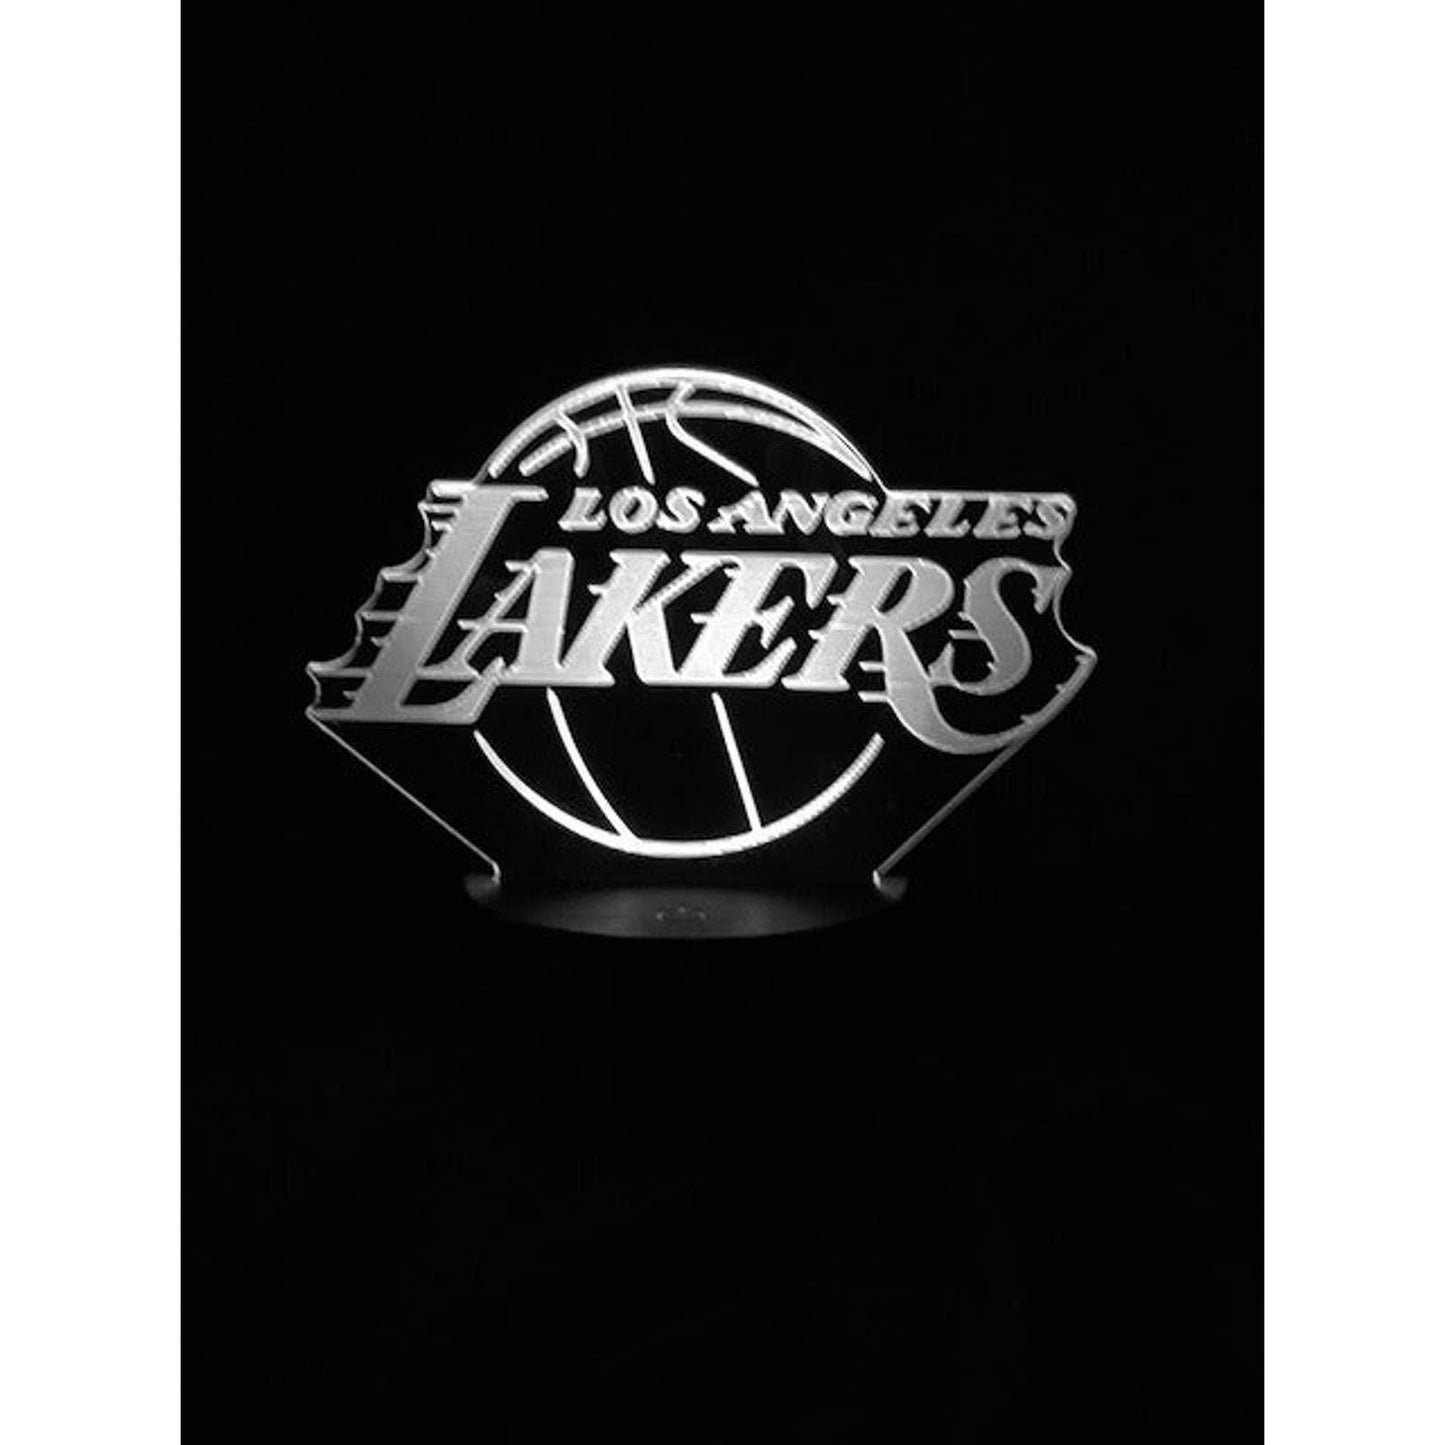 Los Angeles Lakers 3D LED Night-Light 7 Color Changing Lamp w/ Touch Switch